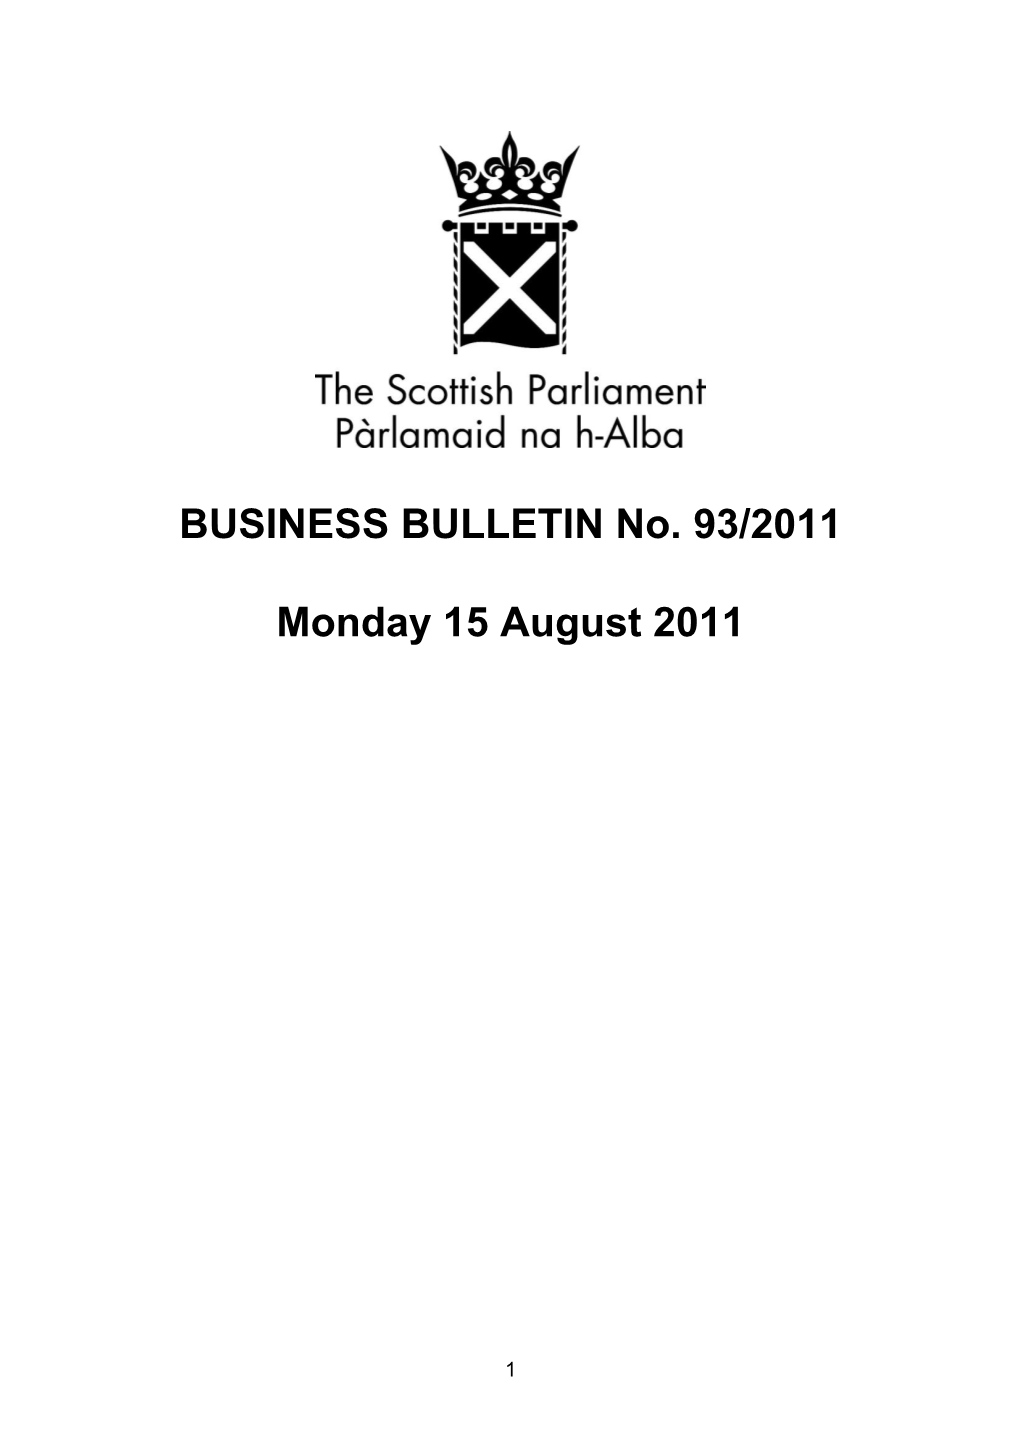 BUSINESS BULLETIN No. 93/2011 Monday 15 August 2011